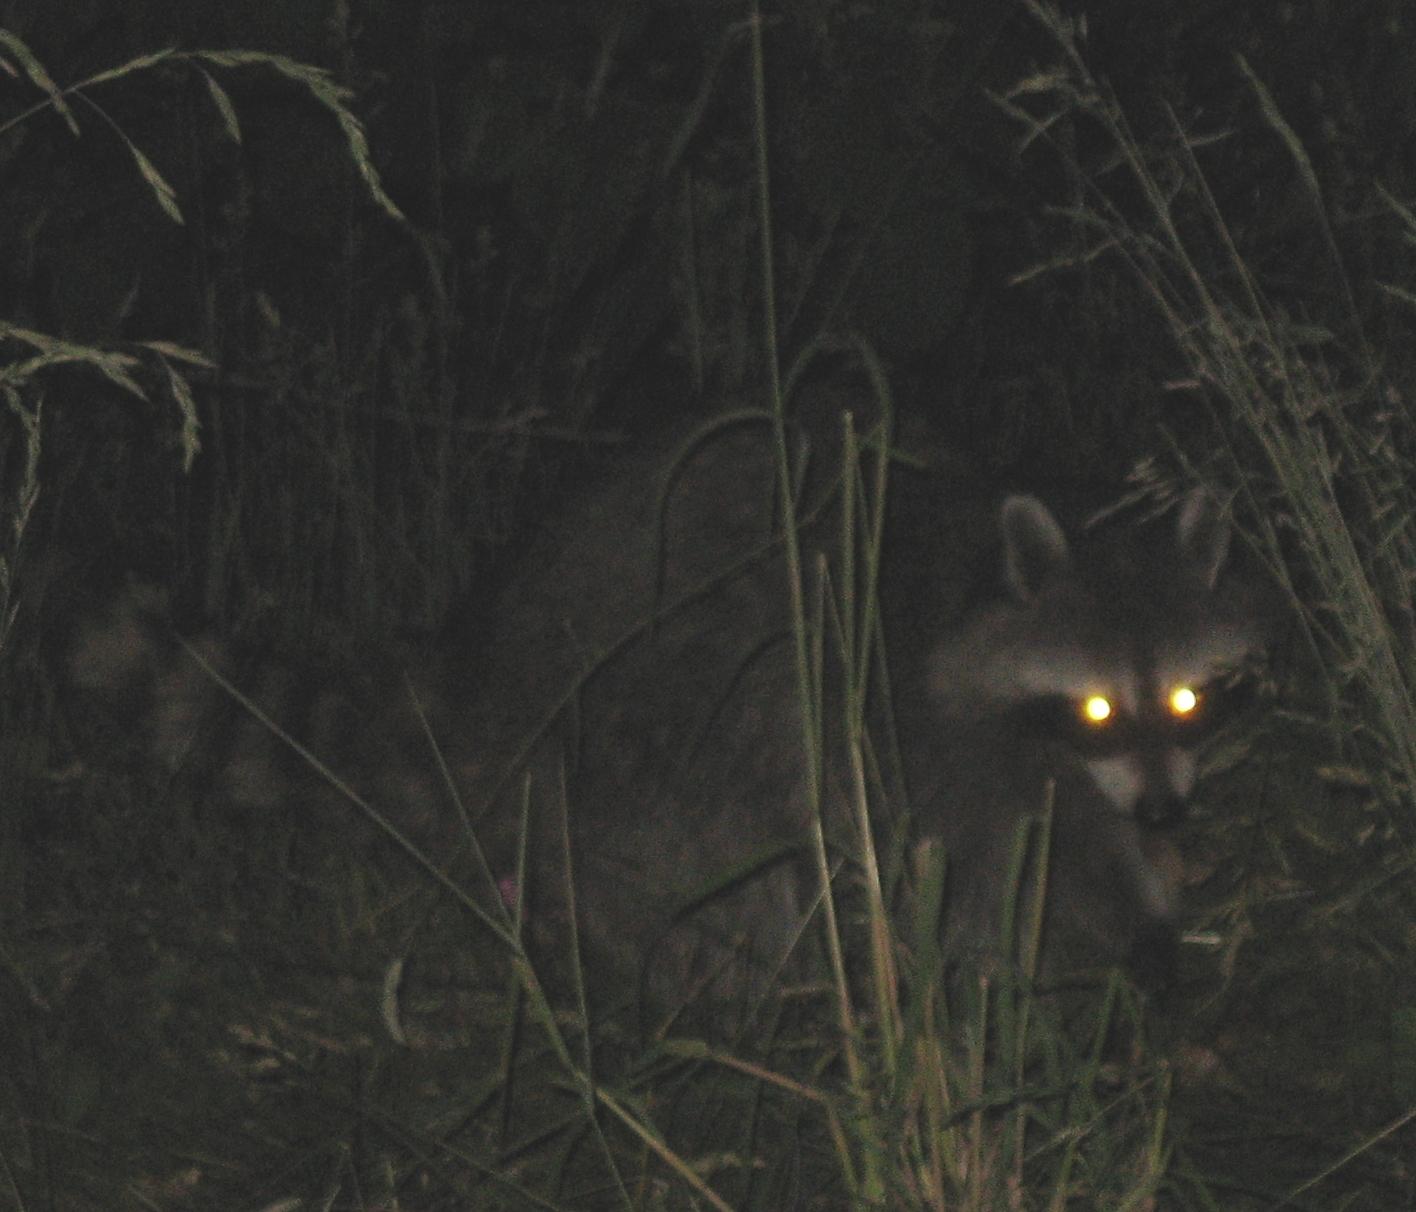 A raccoon's eyes glow strongly in near total darkness of a wooded area